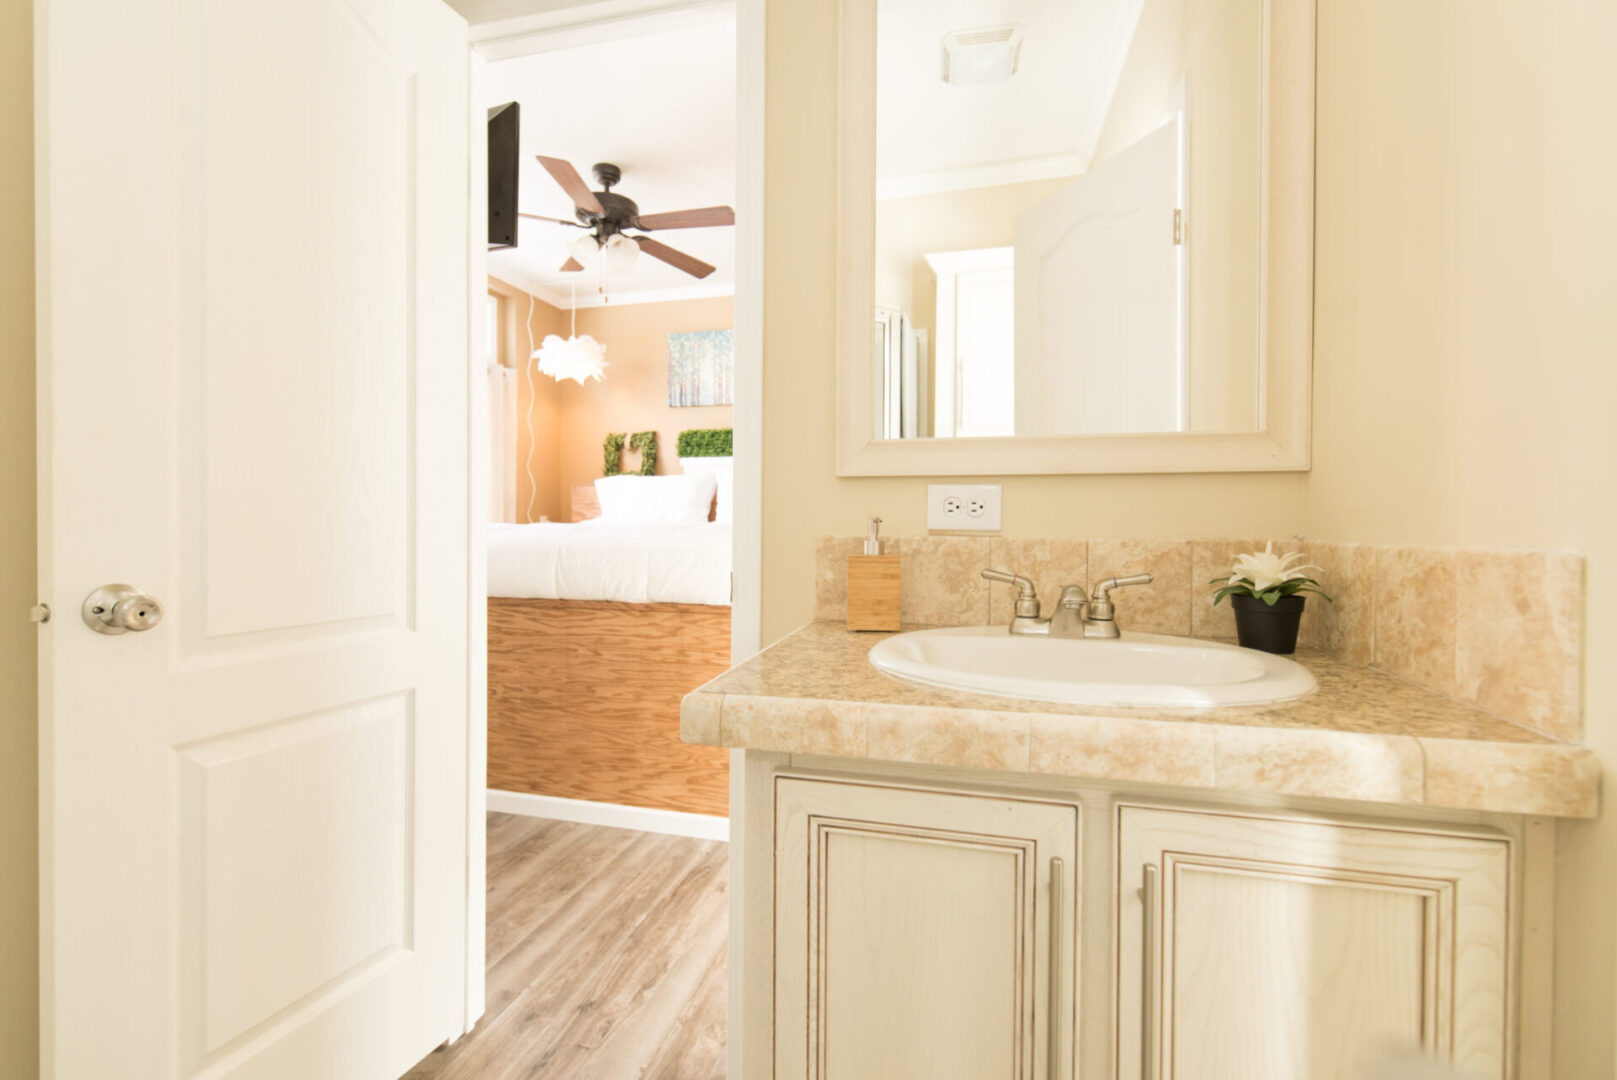 Cream-colored bathroom with cream marble sink and counter under a cream-colored framed mirror